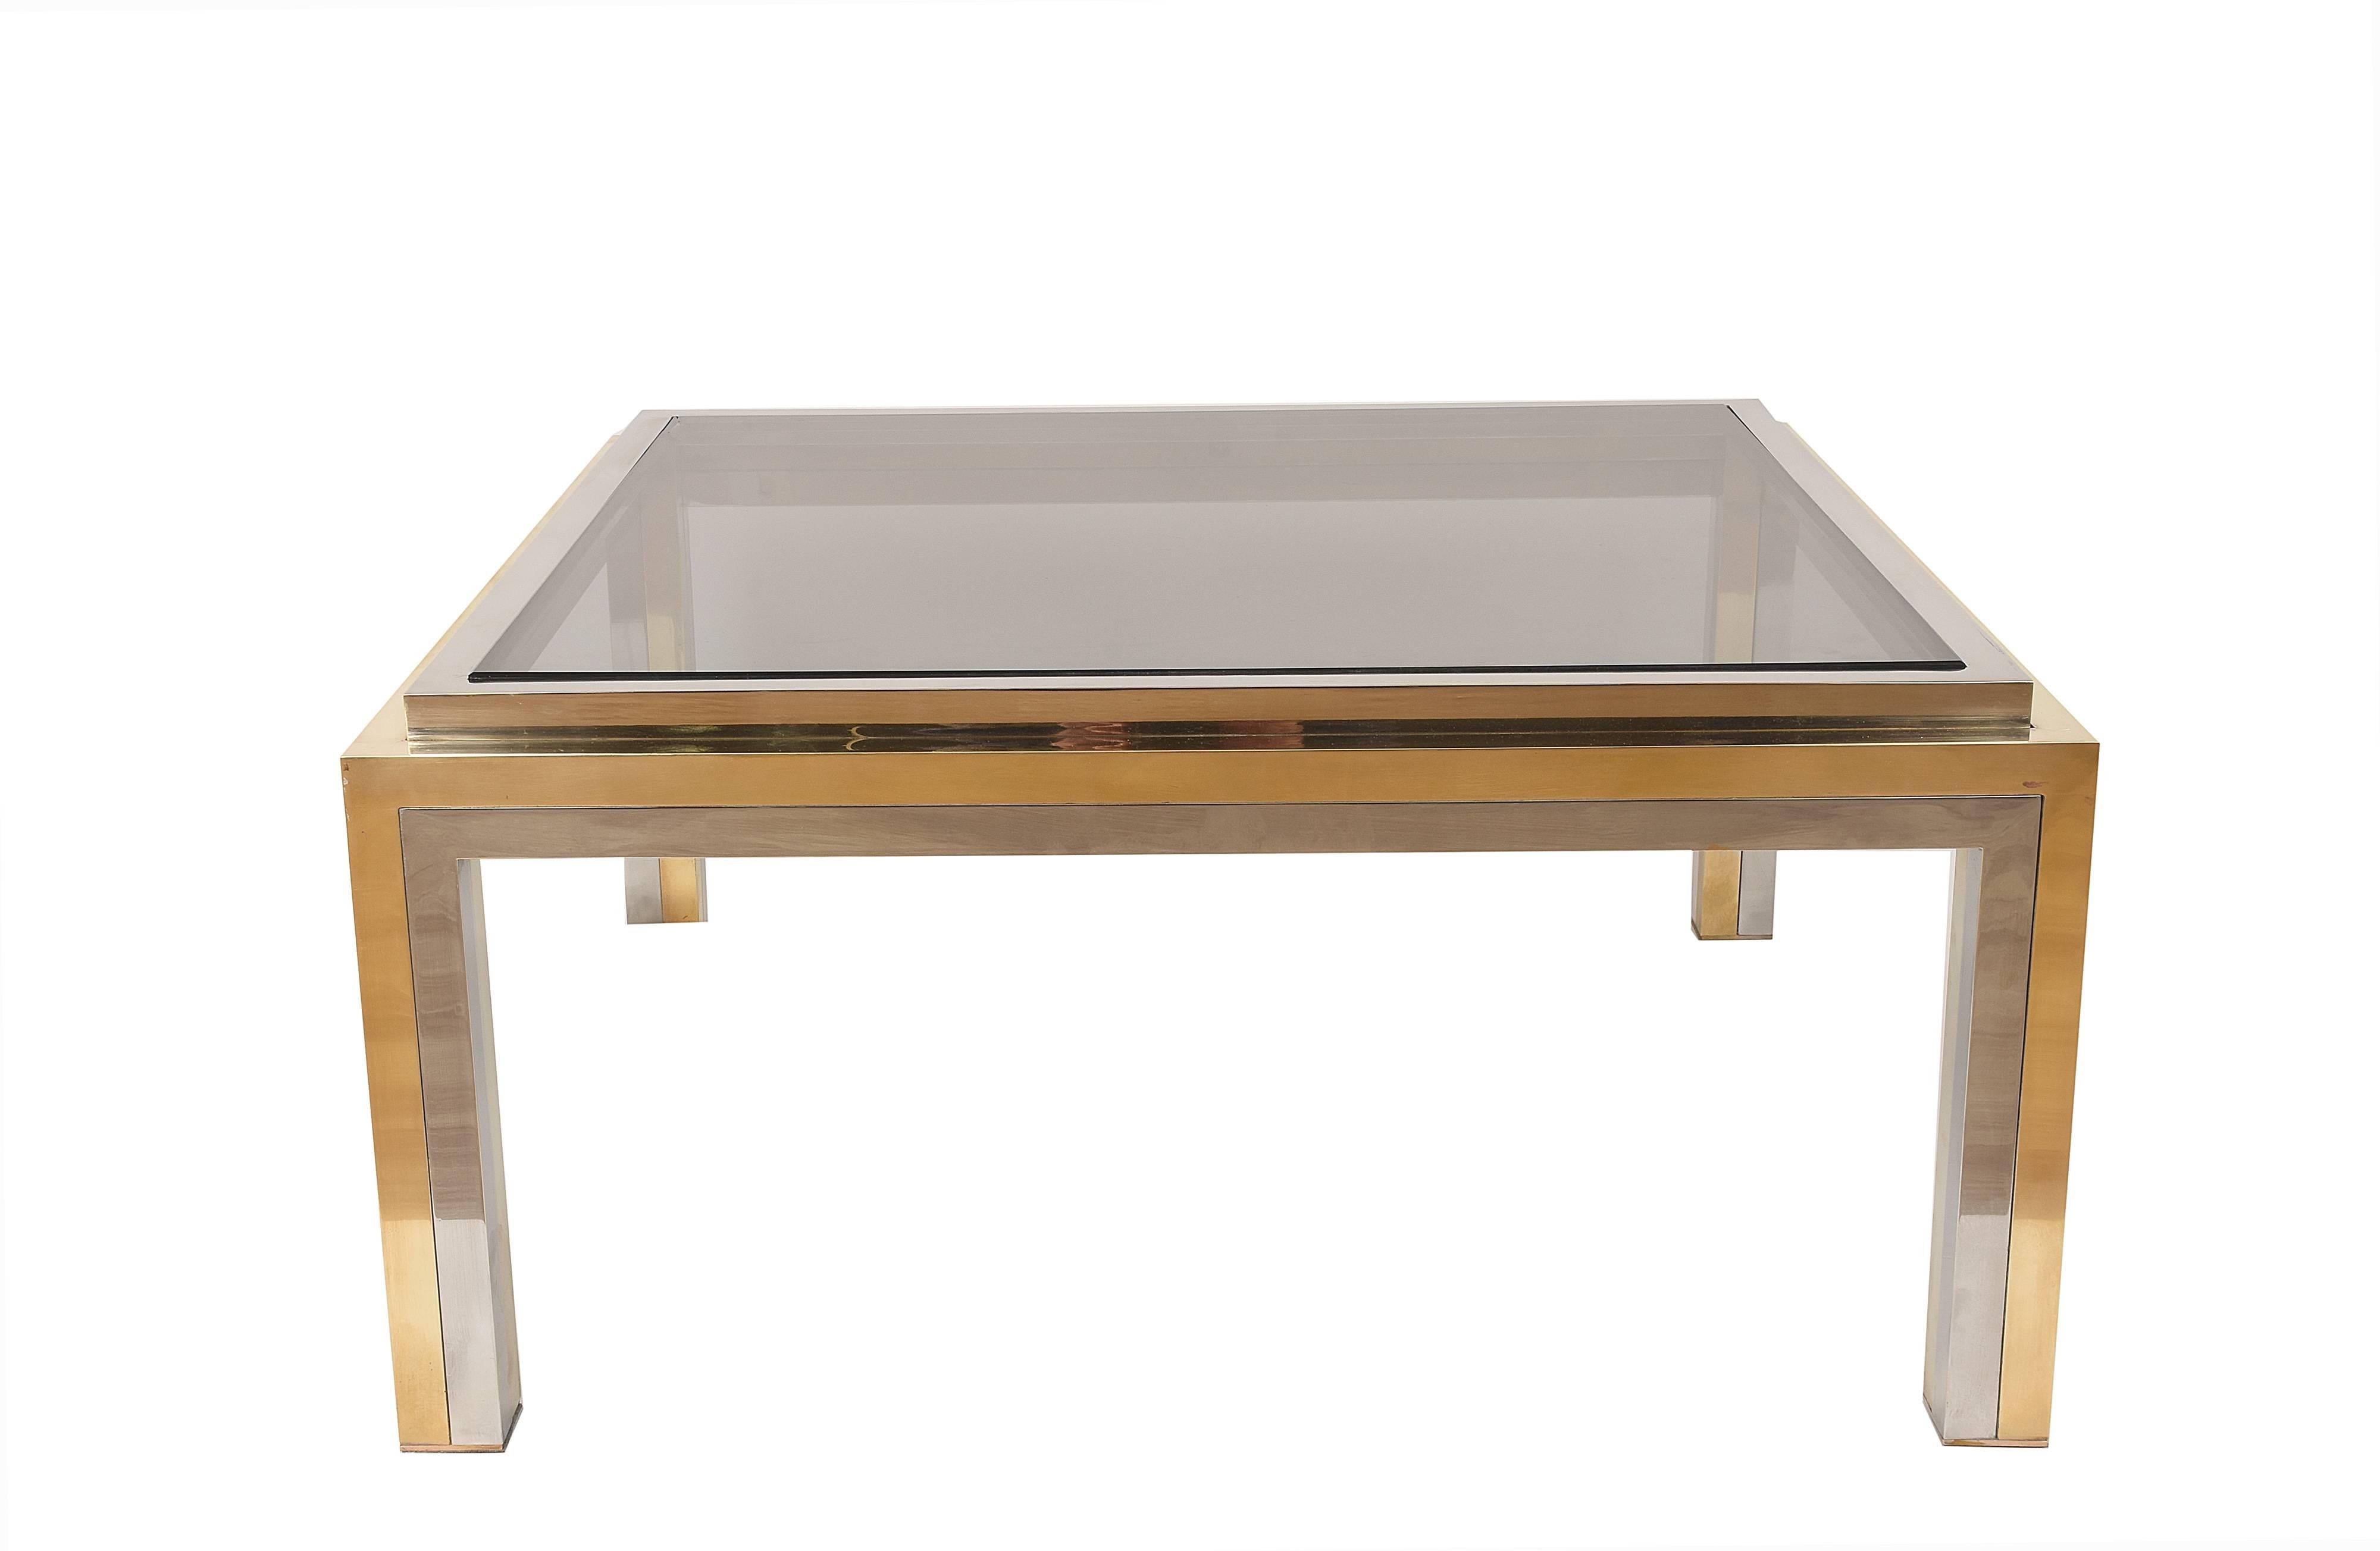 Late 20th Century Midcentury Willy Rizzo Square Brass and Smoked Glass Italian Coffee Table, 1970s